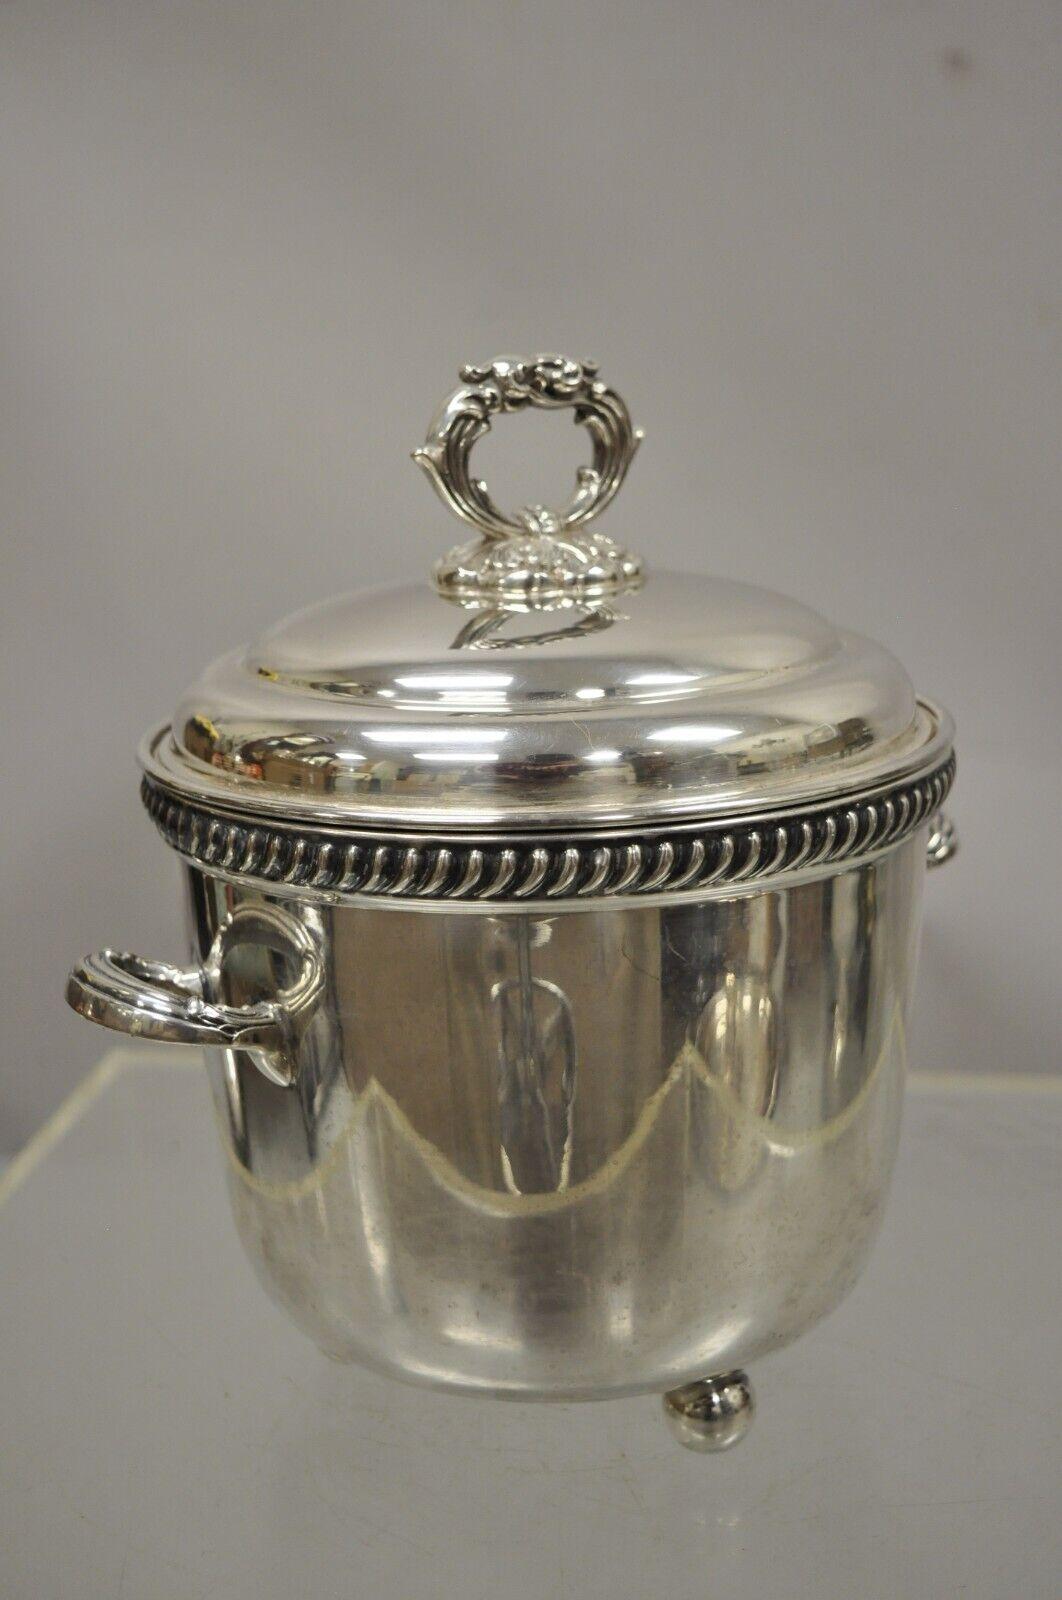 Victor Randolph silver plate lidded ice bucket mercury glass liner ball feet. Item features mercury glass insulated liner, raised on ball form feet, lidded with ornate handle, original stamp. Circa mid 20th century. Measurements: 10